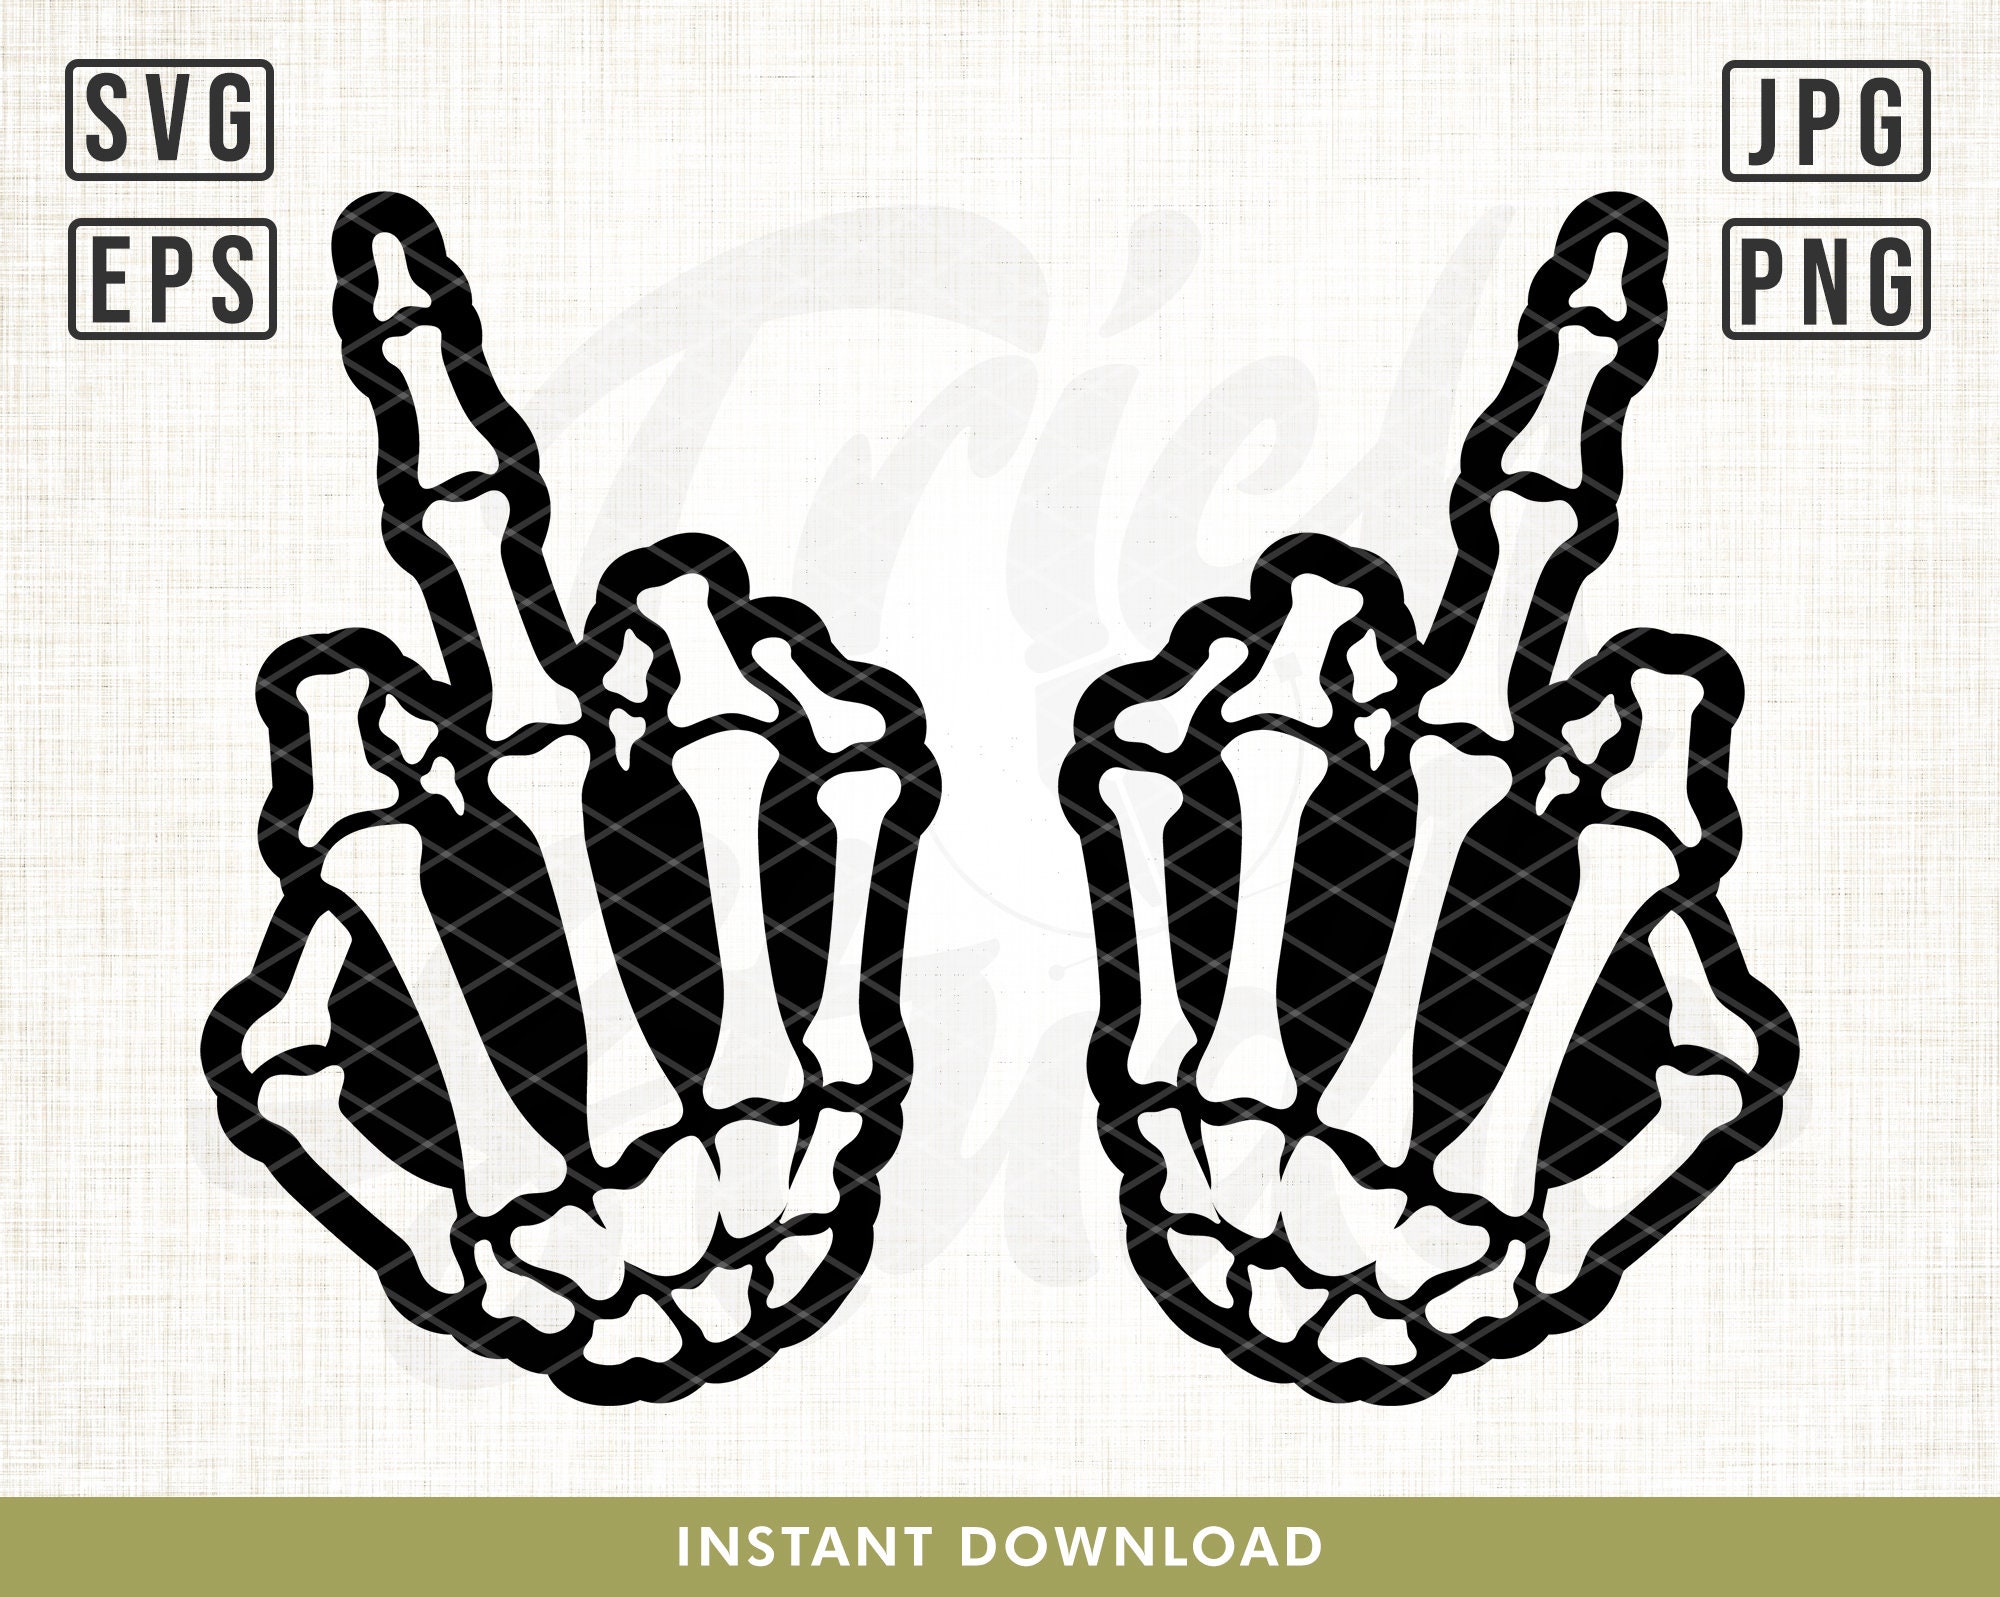 Retro Emblem With Grim Reaper Showing Middle Fingers Monochrome Design  Element With Skeleton Crossed Scythe Fuck Off Gesture And Text  Expression Concept For Tattoo Stamp Print Template Royalty Free SVG  Cliparts Vectors